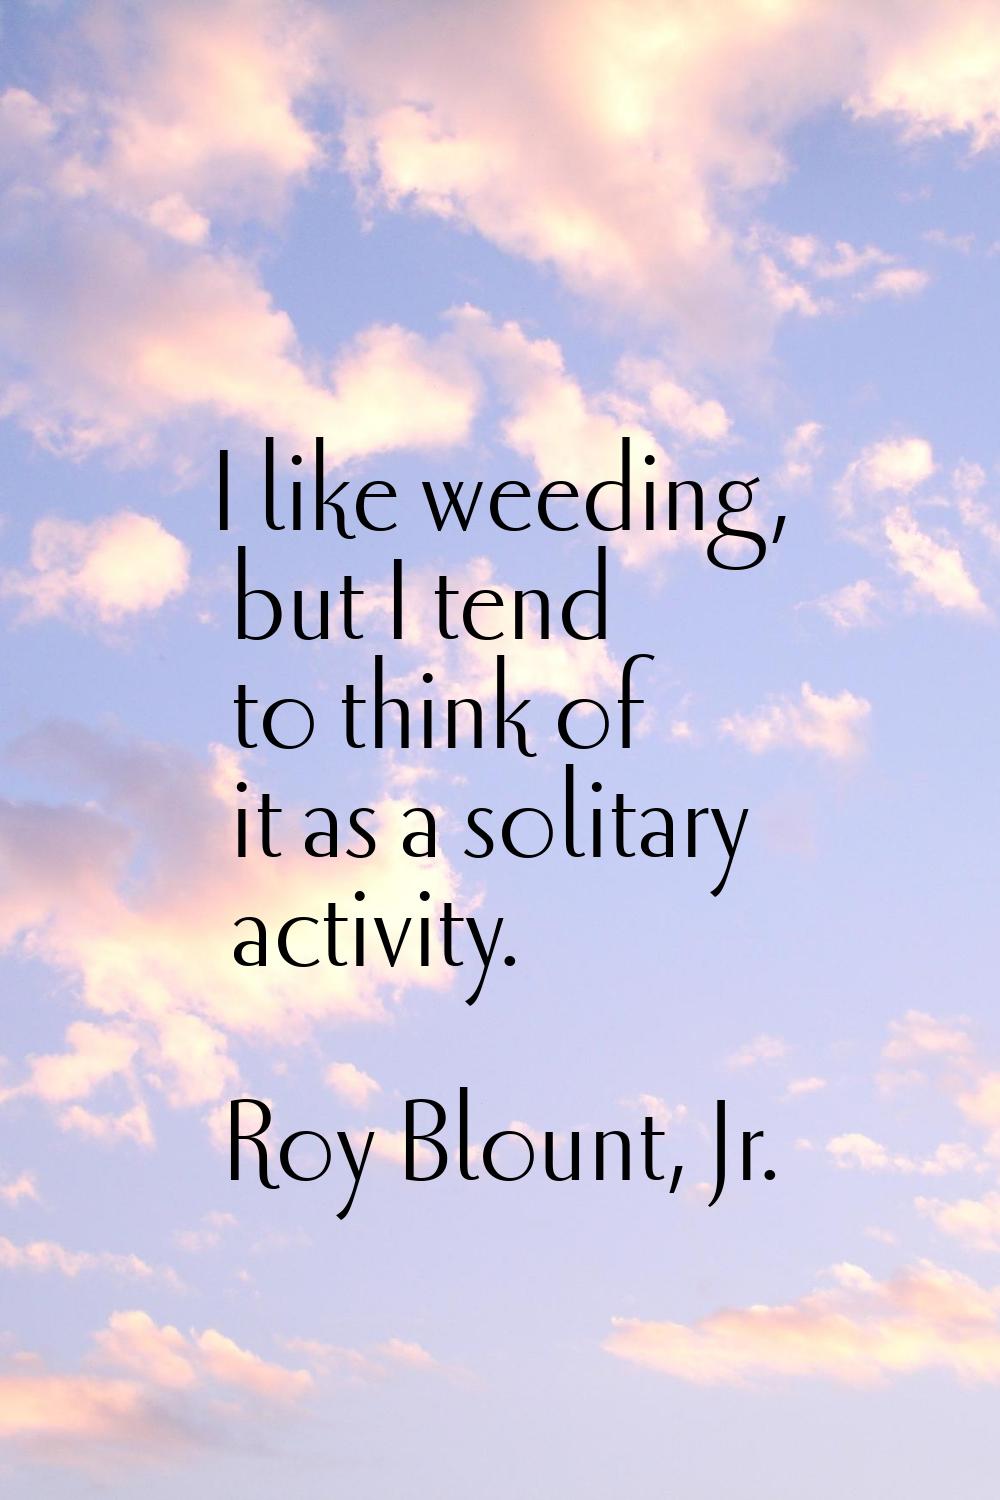 I like weeding, but I tend to think of it as a solitary activity.